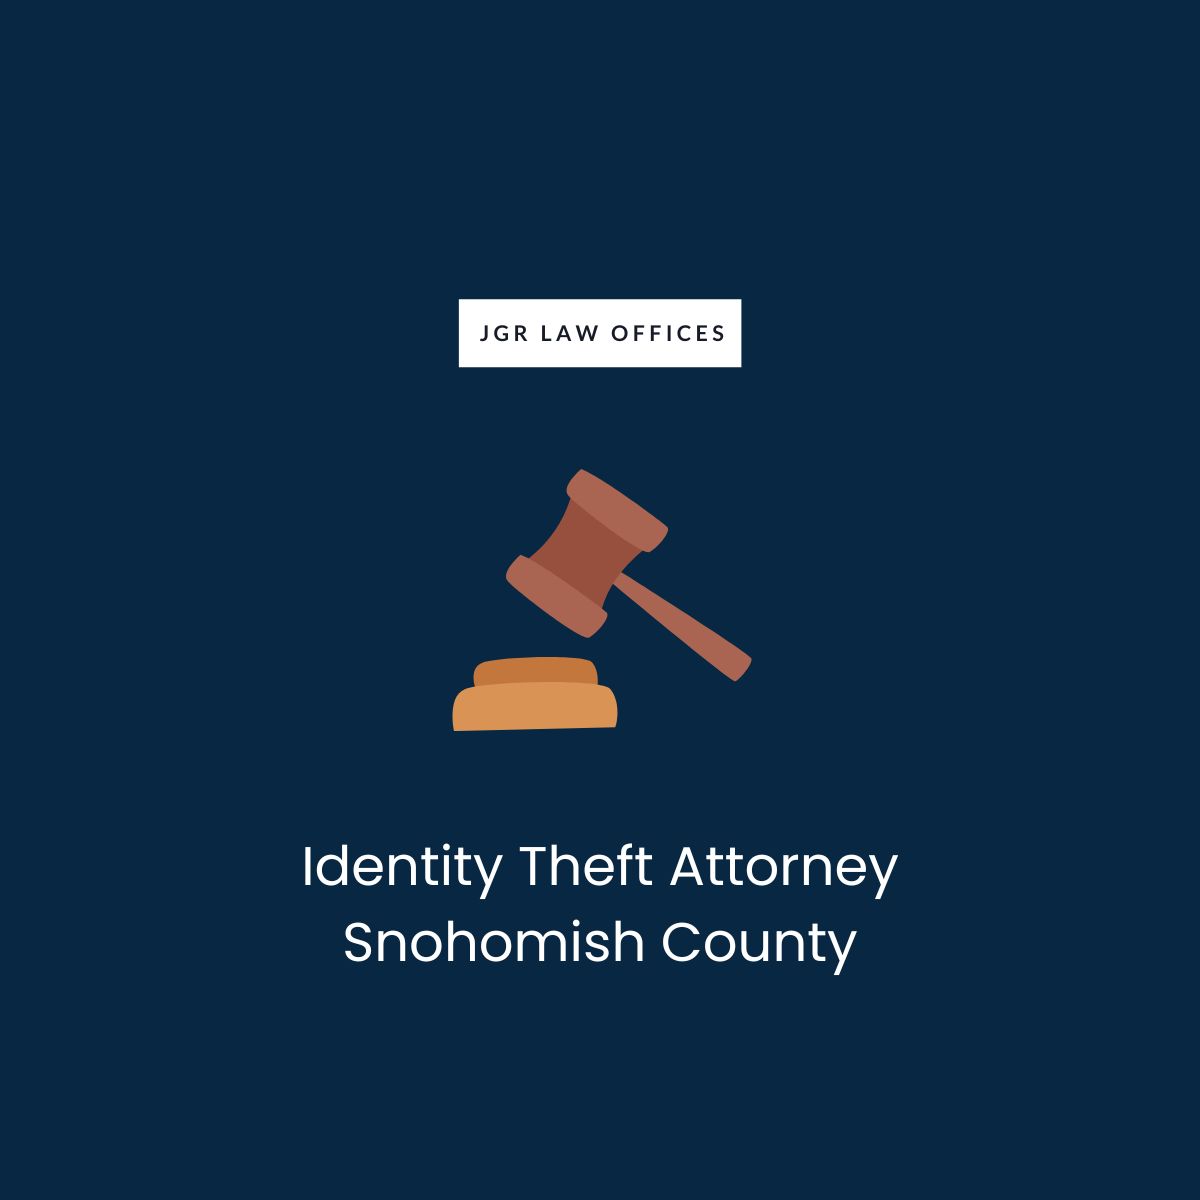 Identity Theft Attorney Snohomish County